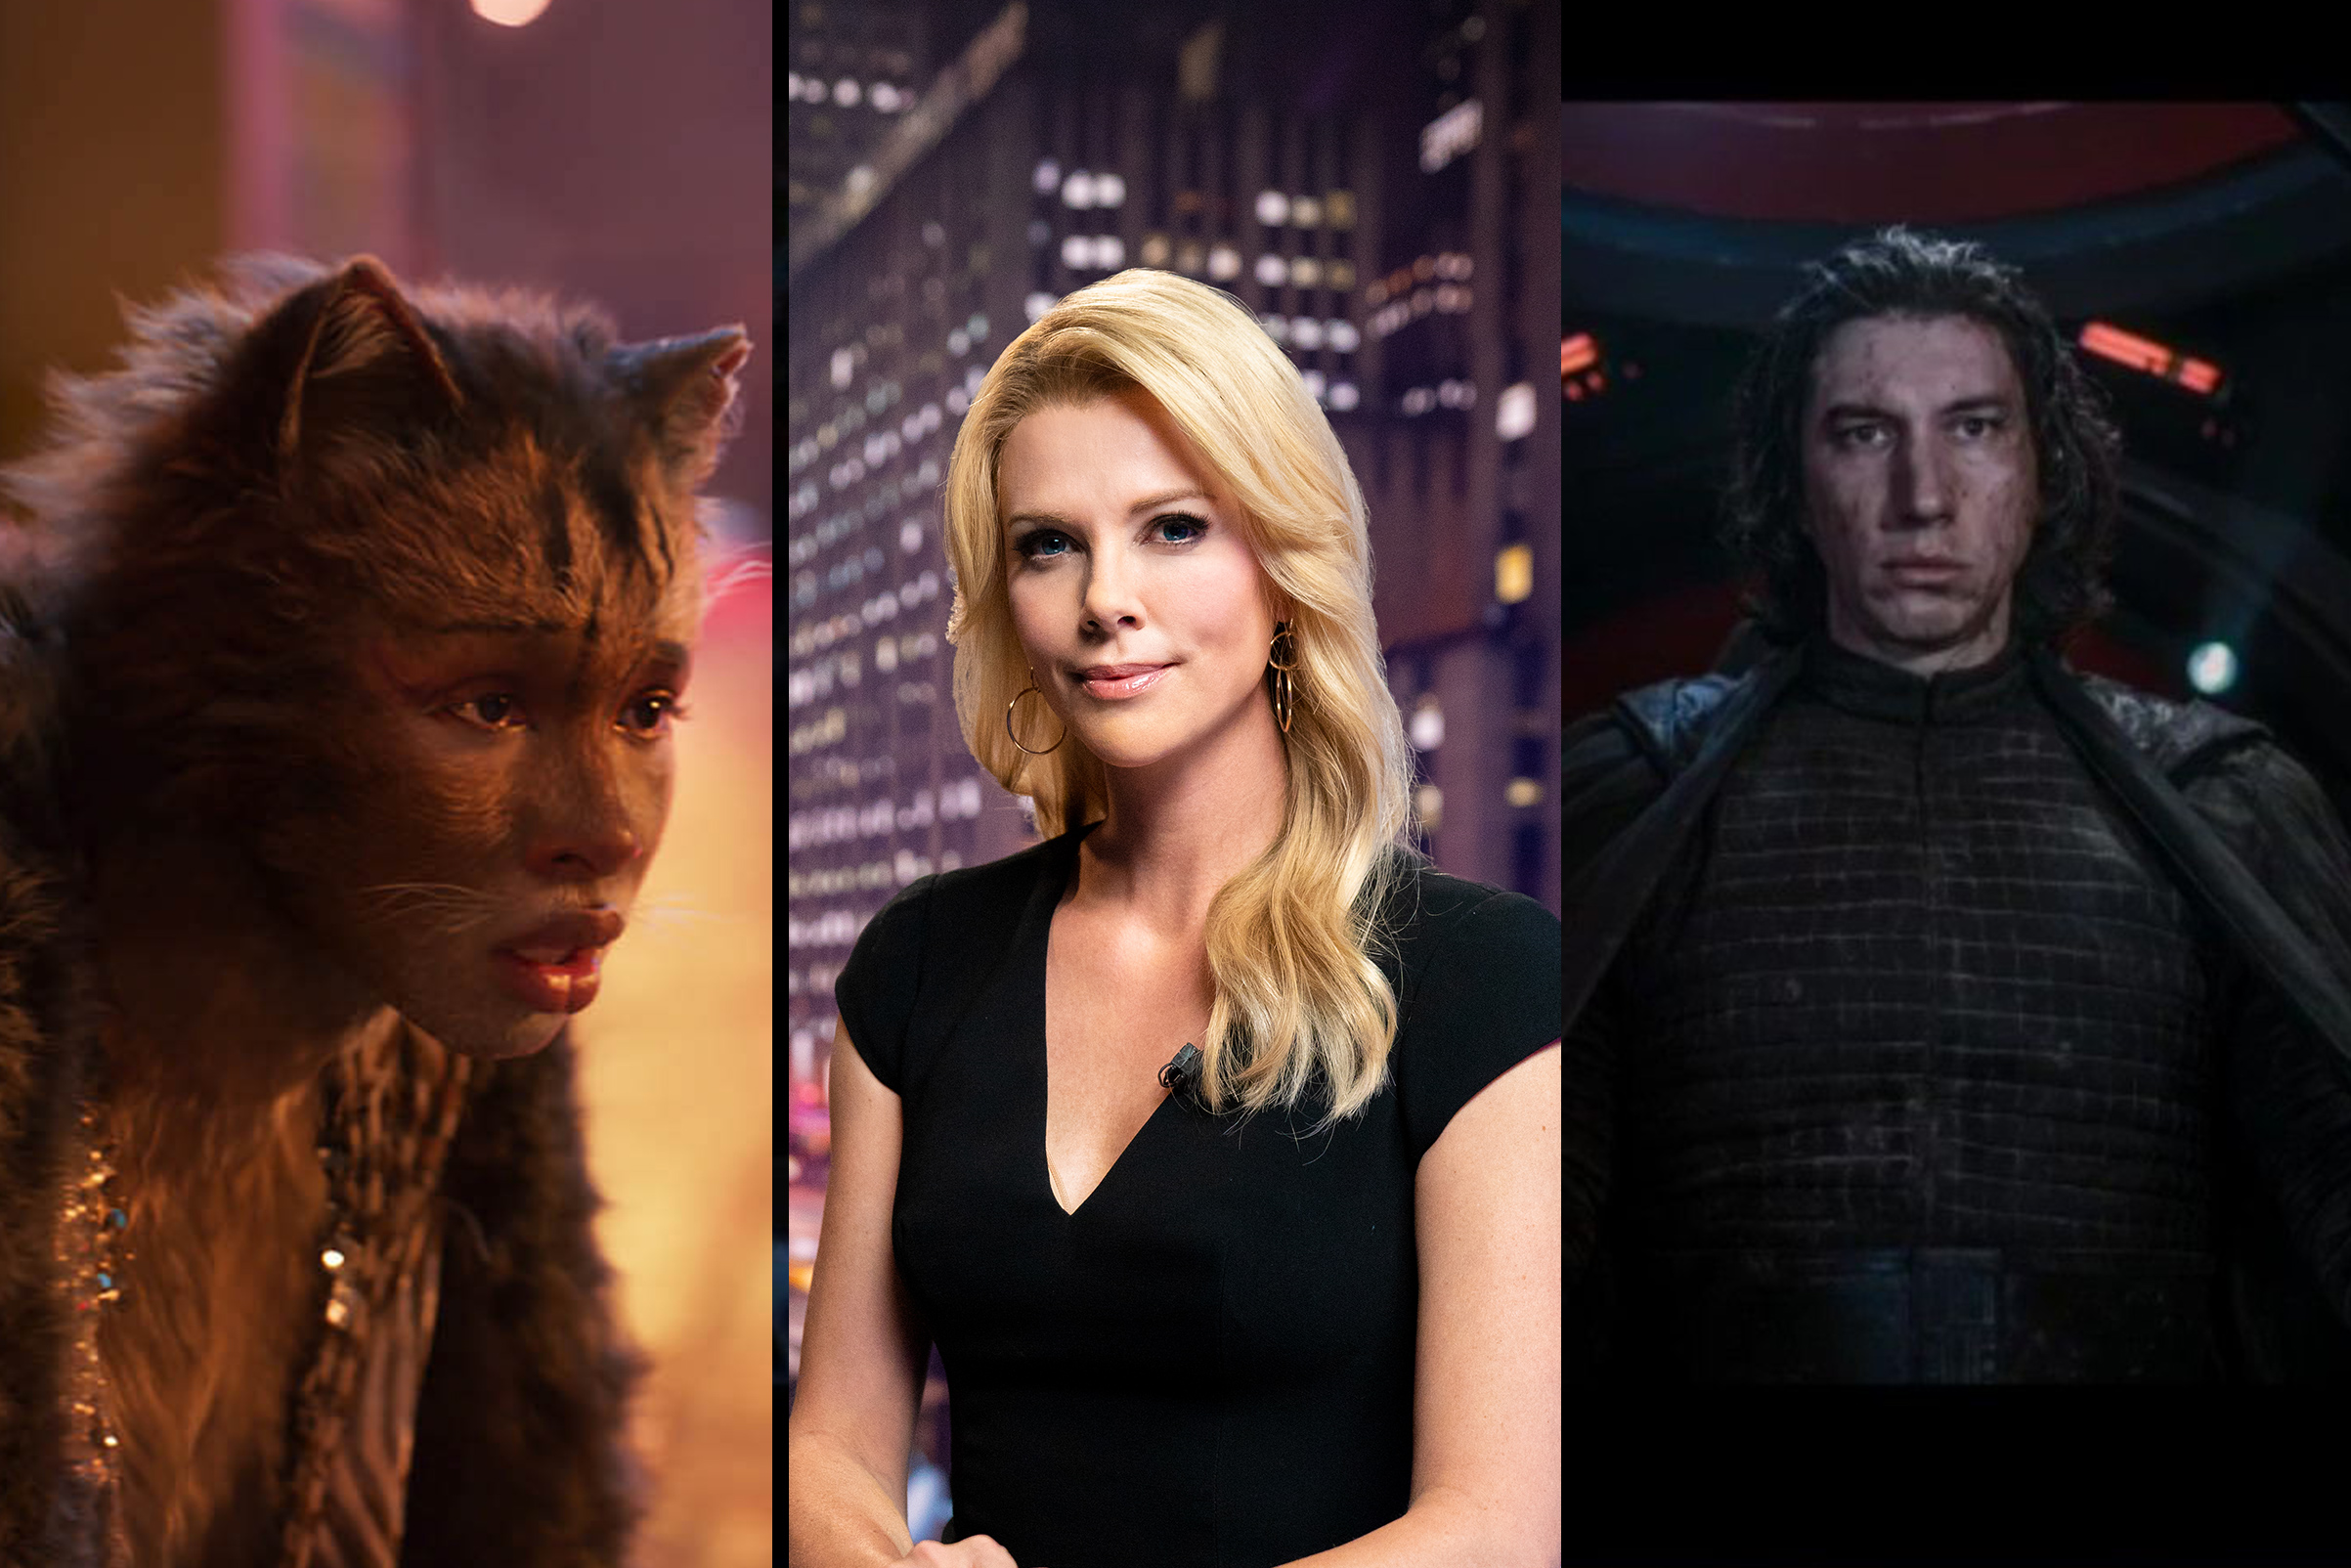 (L-R) Jennifer Hudson in 'Cats', Charlize Theron in 'Bombshell', and Adam Driver in 'Star Wars: The Rise of Skywalker' (Universal Pictures; Lionsgate; Lucasfilm)